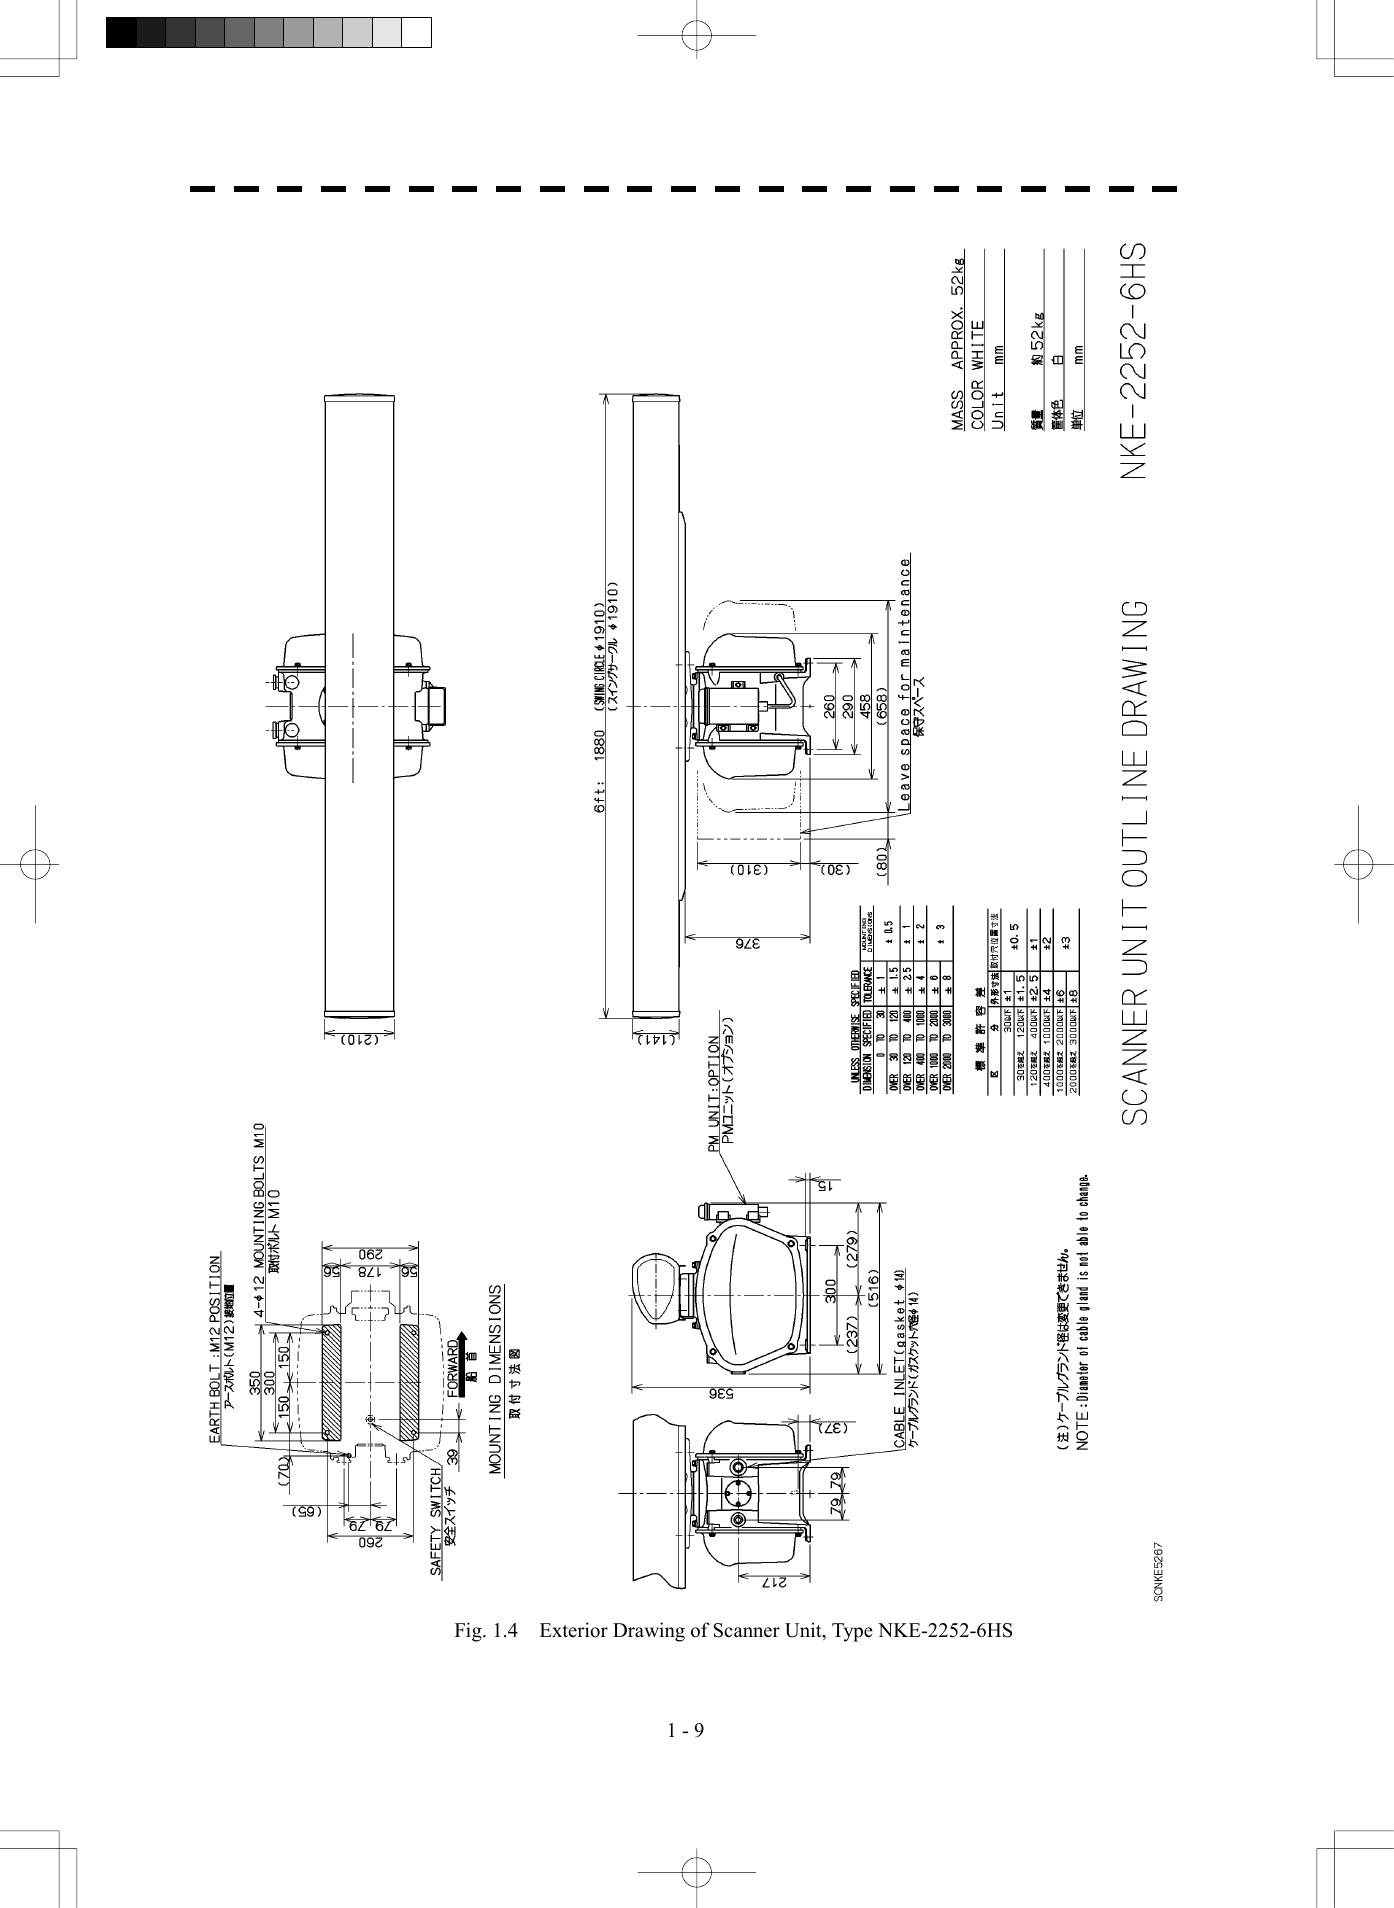   1 - 9 Fig. 1.4    Exterior Drawing of Scanner Unit, Type NKE-2252-6HS 